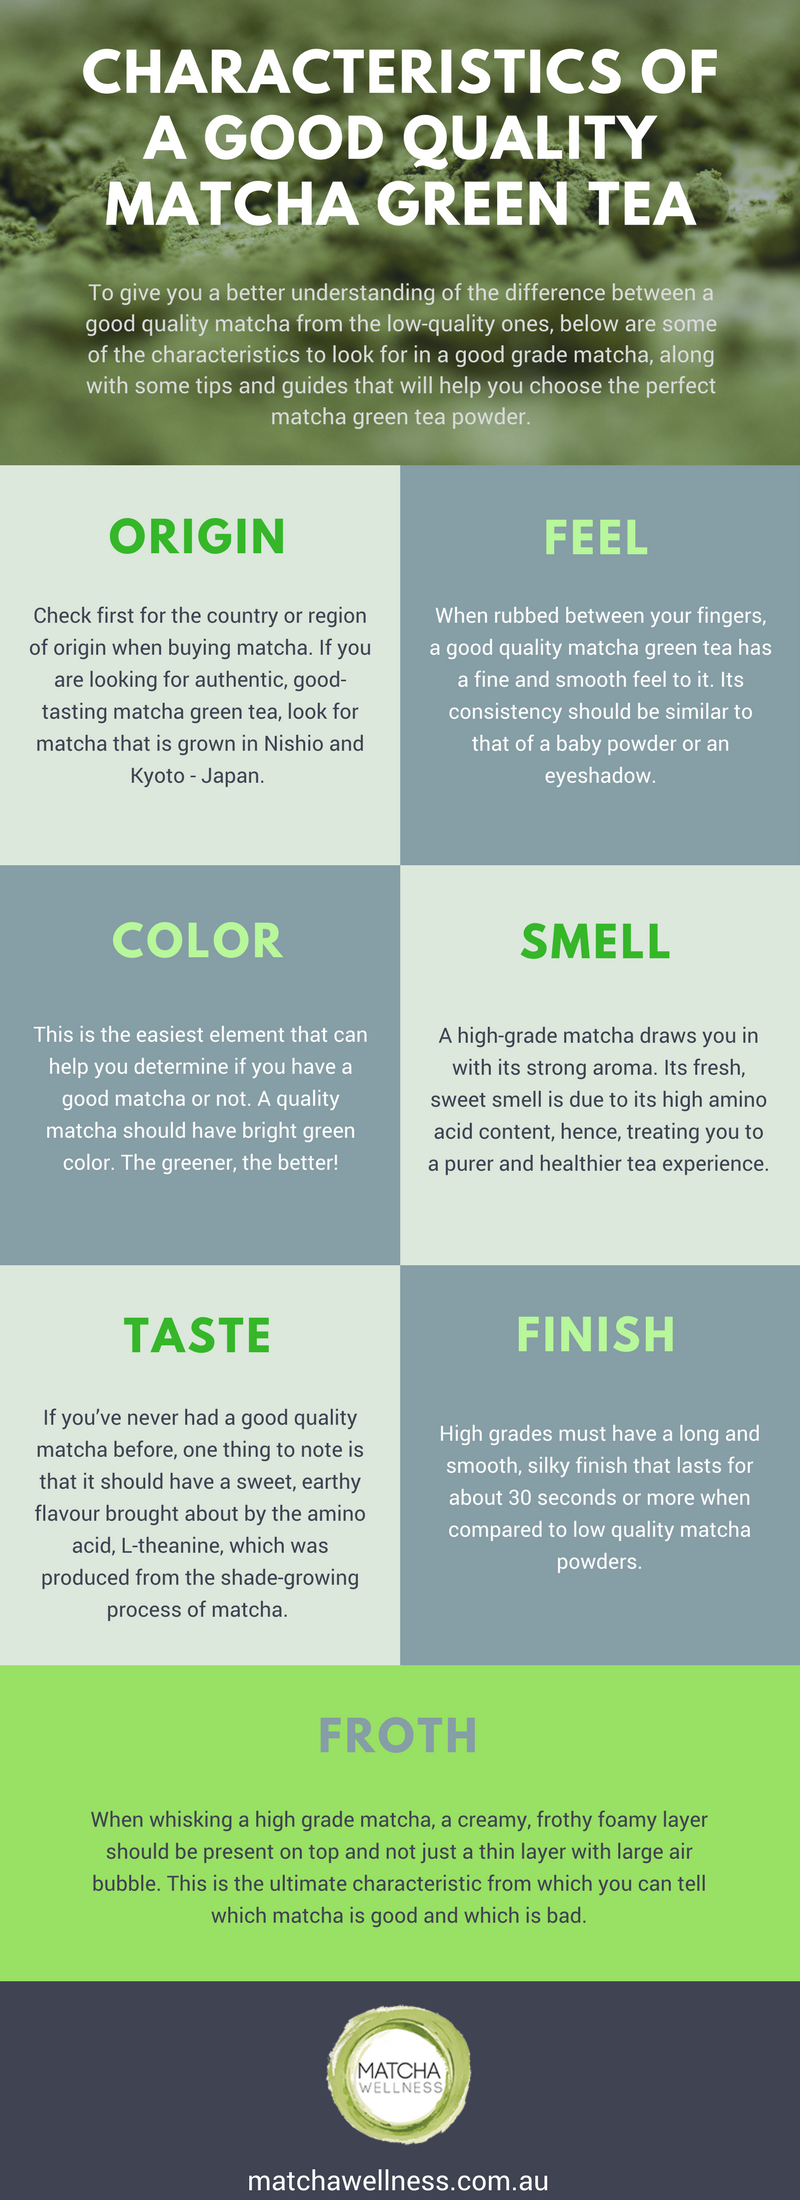 QUALITY MATCHA HOW TO TELL A GOOD MATCHA FROM A BAD ONE INFOGRAPHIC